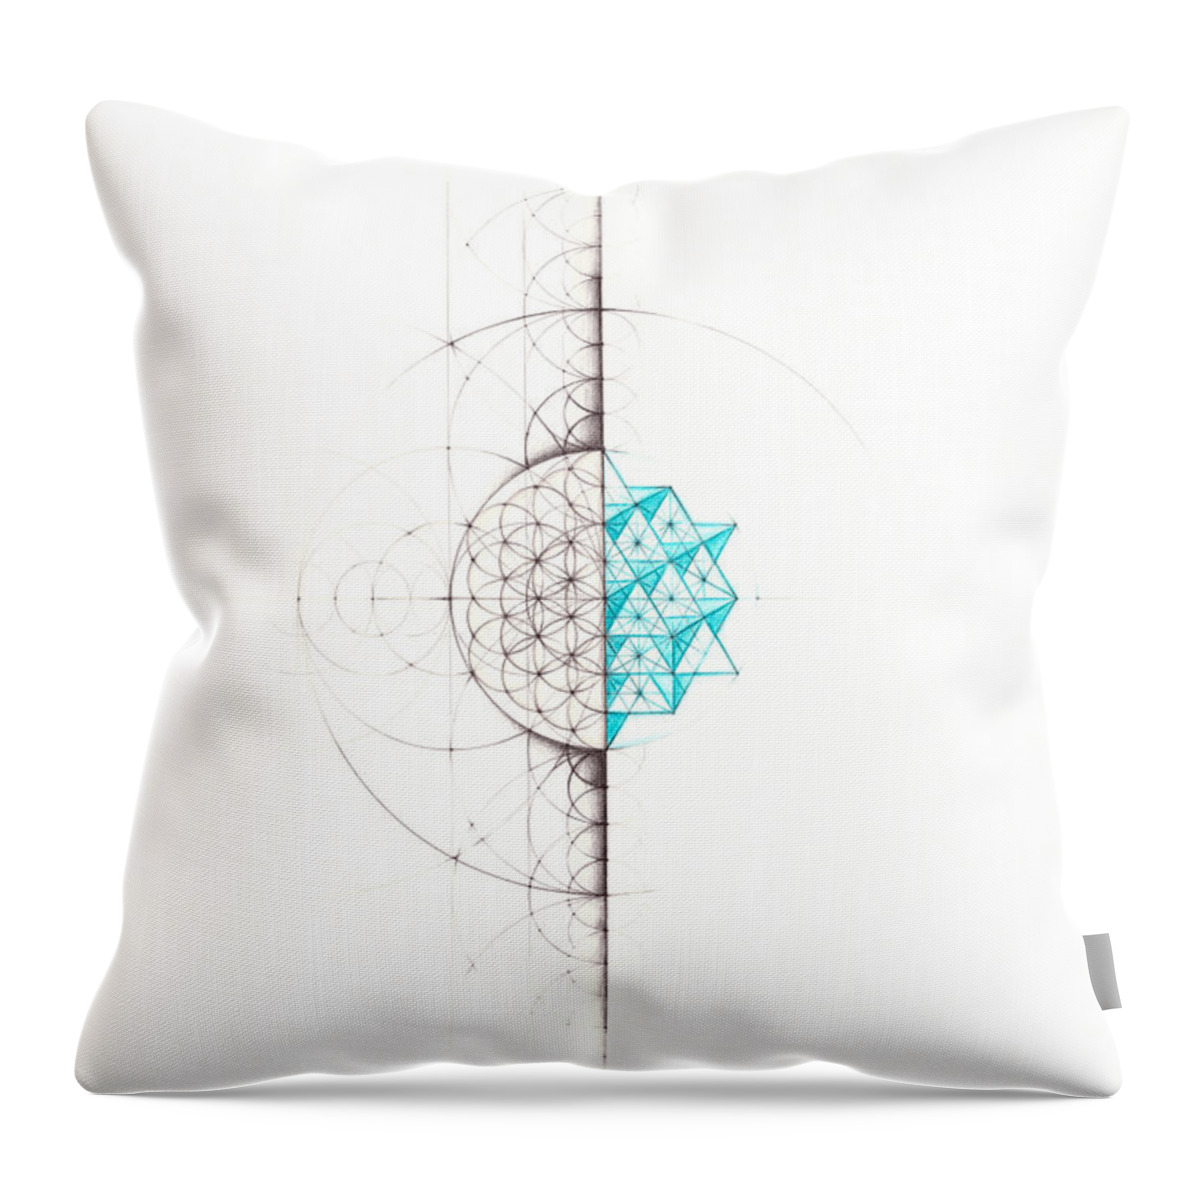 Geometry Throw Pillow featuring the drawing Intuitive Geometry 64 Tetrahedron Matrix by Nathalie Strassburg